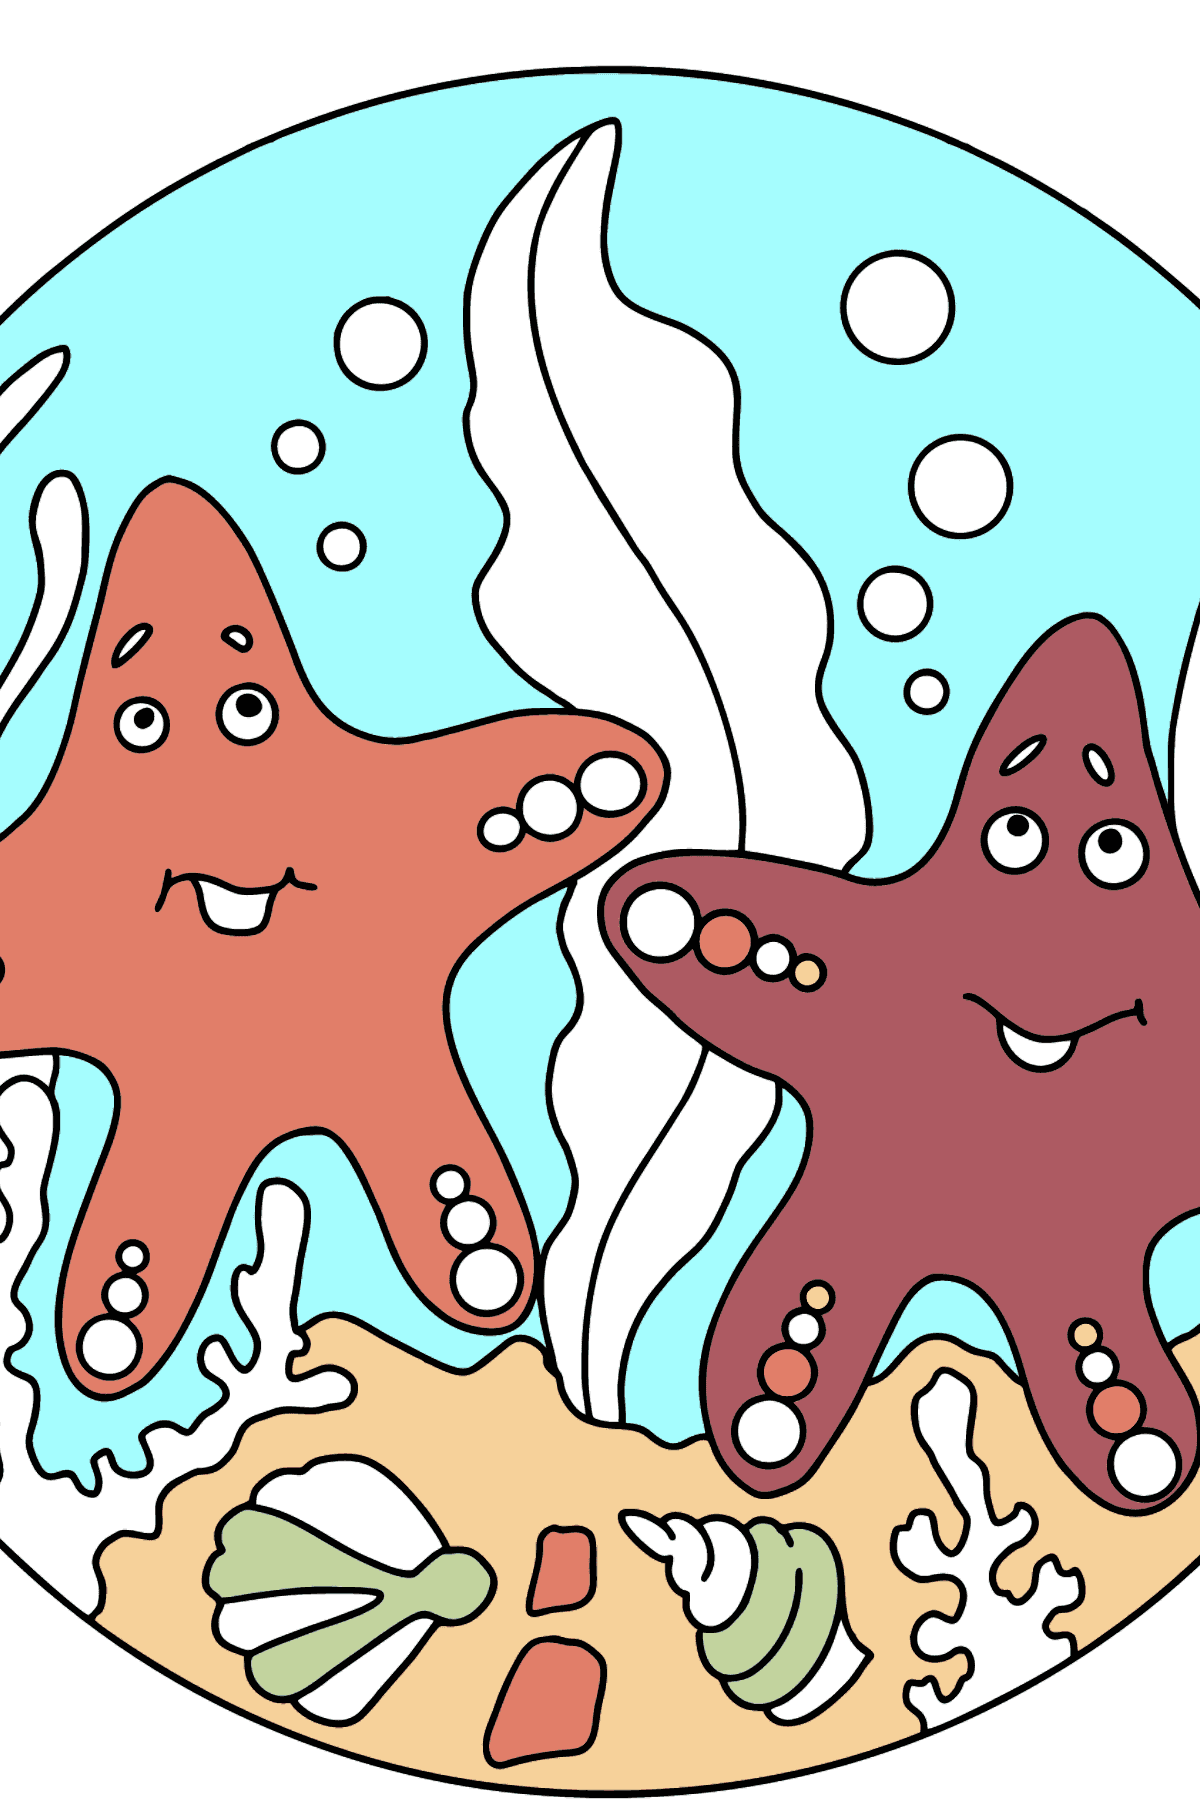 Cute Starfish are Playing Coloring Page - Coloring Pages for Kids